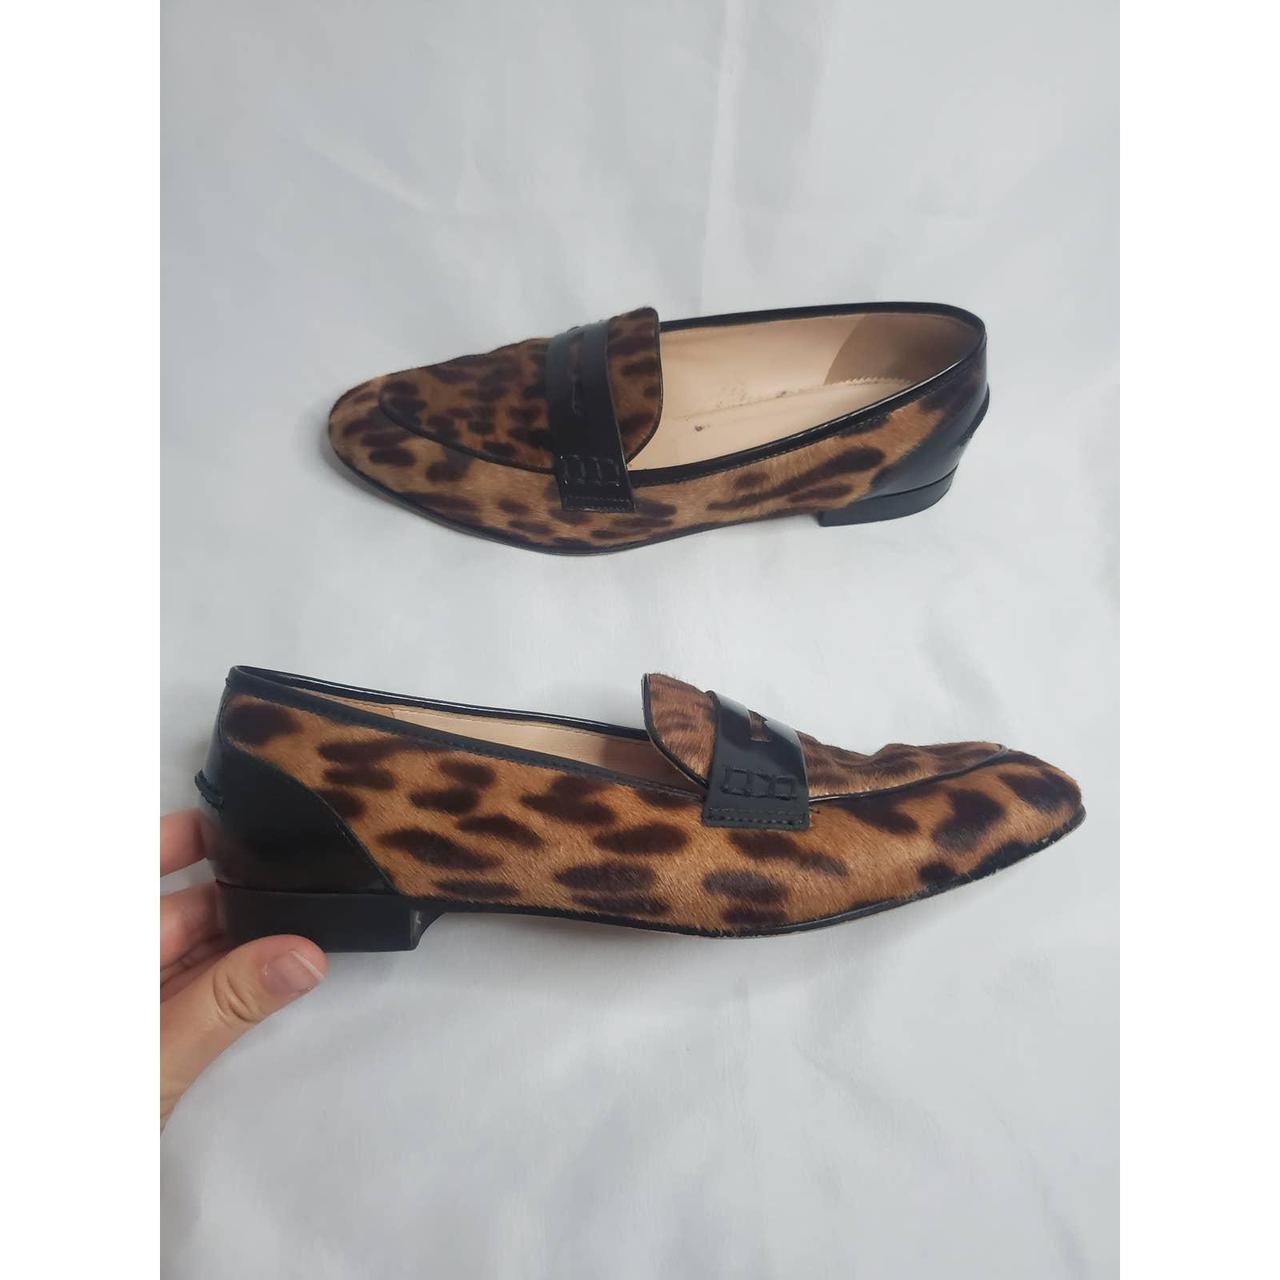 J.Crew Academy Penny Loafers Leopard Calf Hair for Sale in Camby, IN -  OfferUp